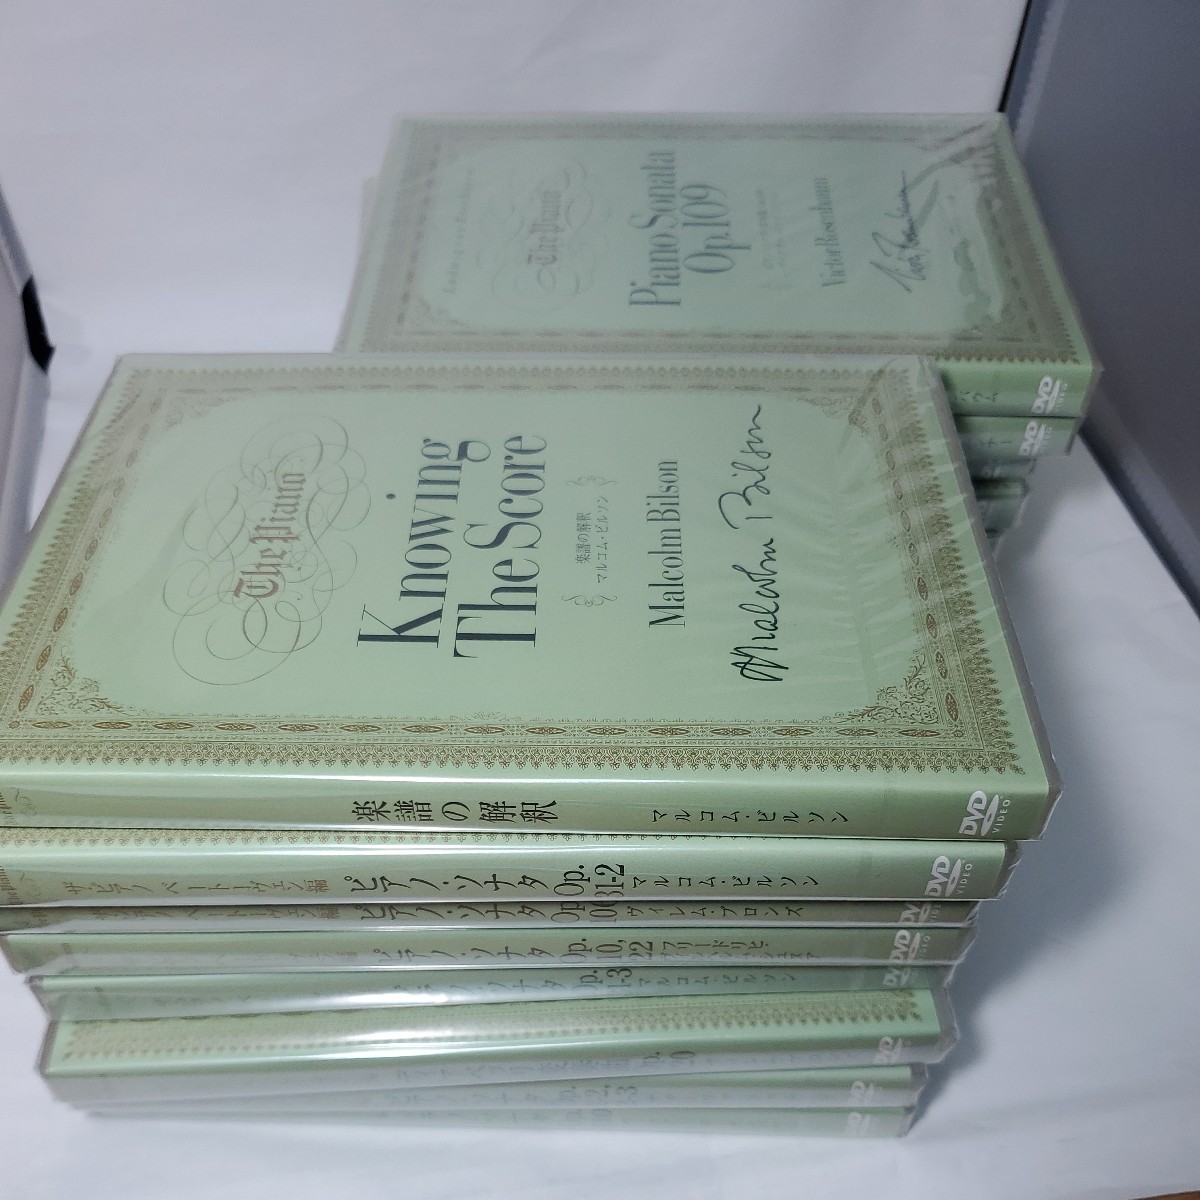  rare [ new goods unopened ]DVD The * piano The Piano..... beige to-ven compilation 15 volume set writing . company not for sale limited goods 